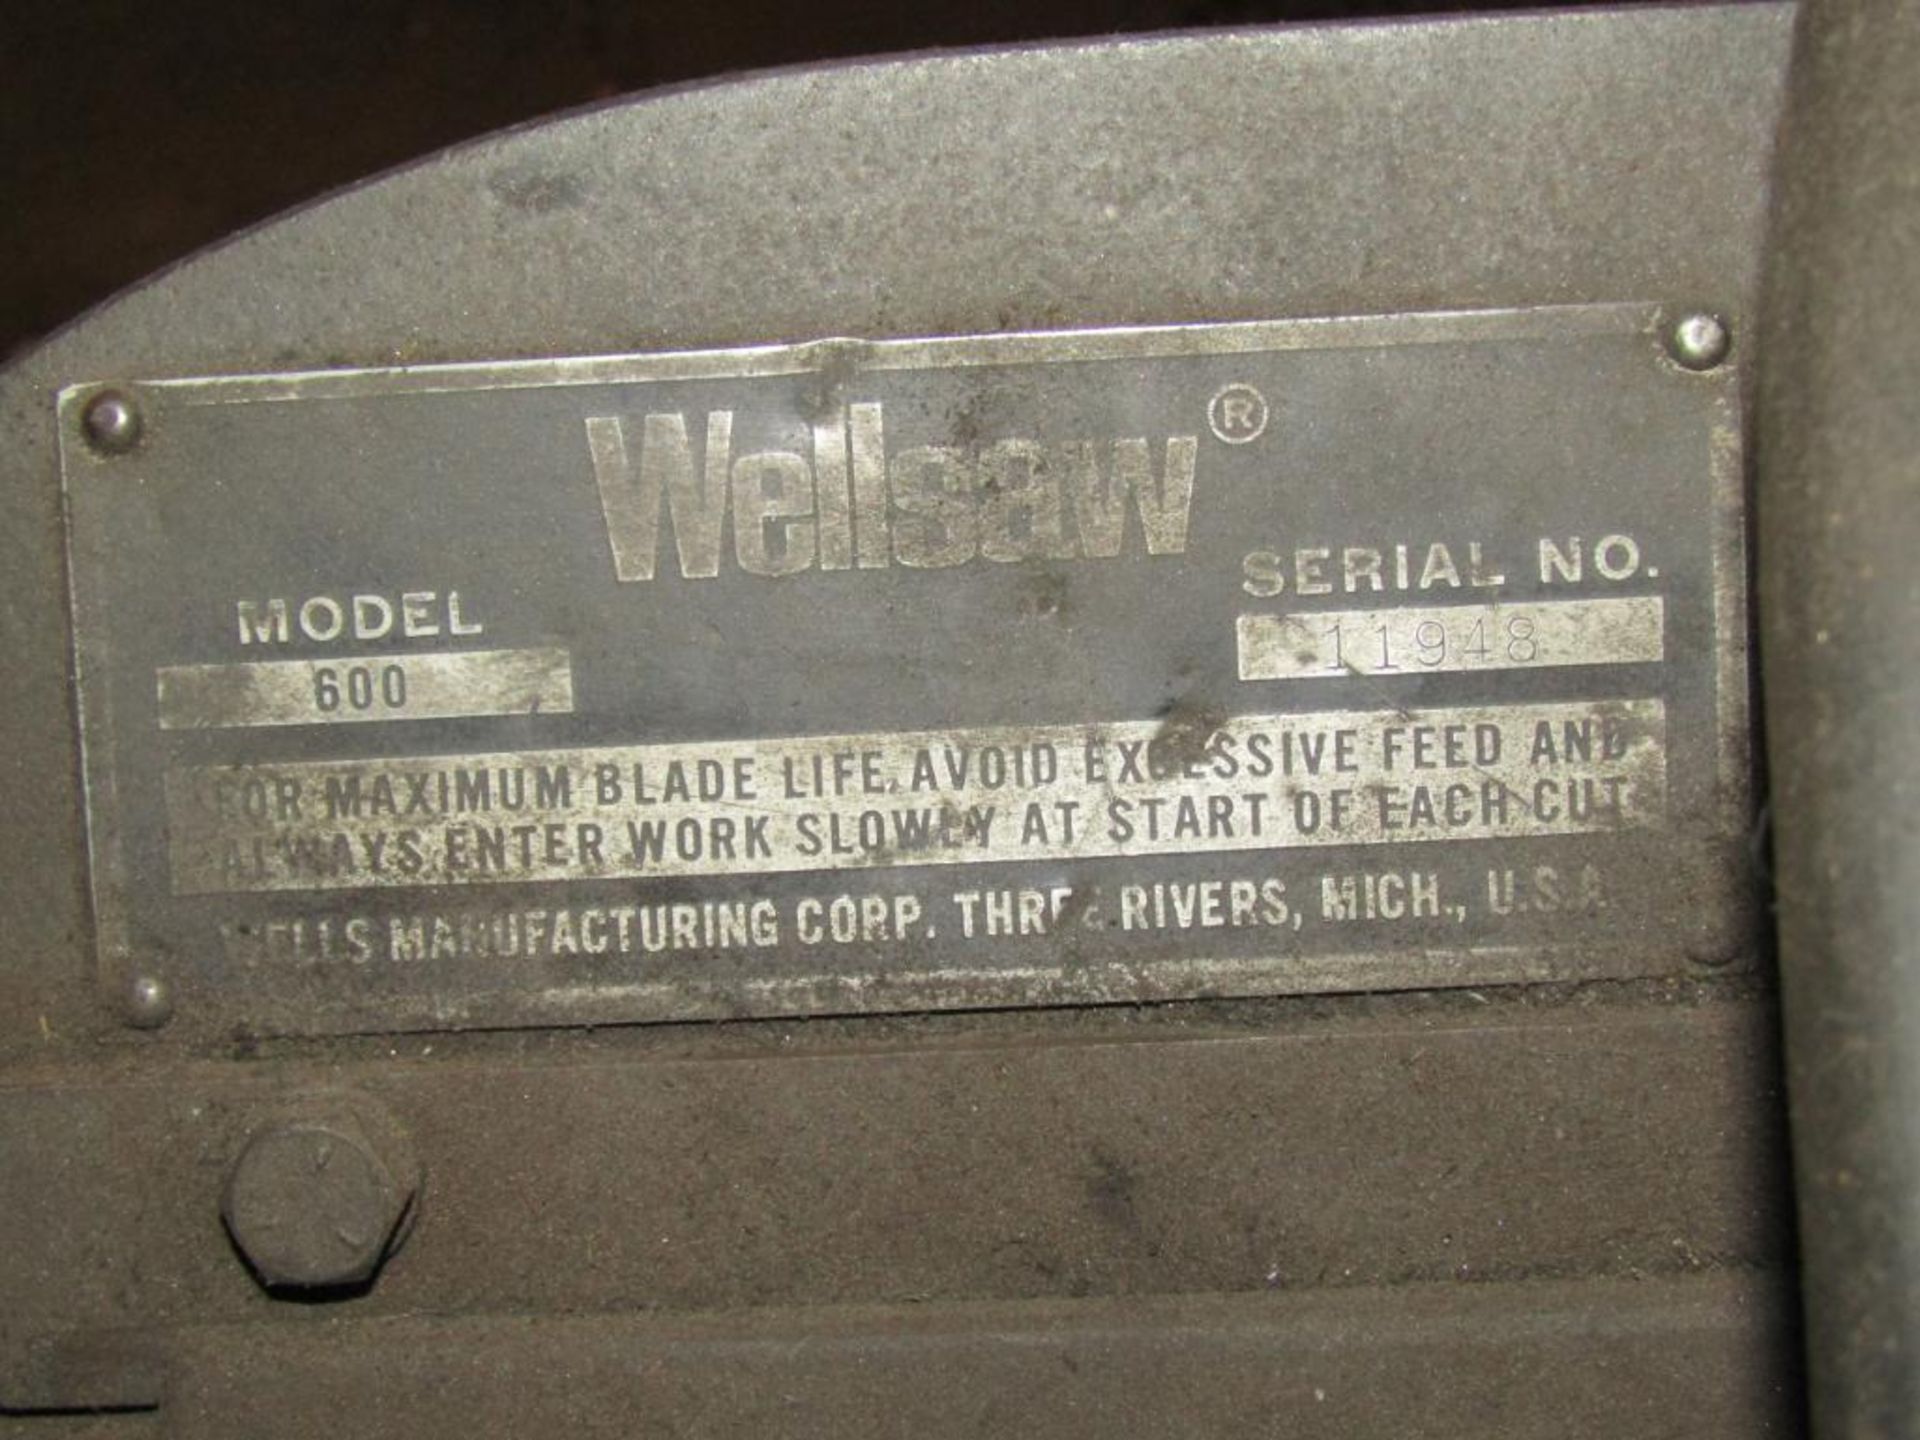 Wellsaw 600 Horizontal Bandsaw; S/N 11948; (Not in Working Condition) - Image 2 of 3